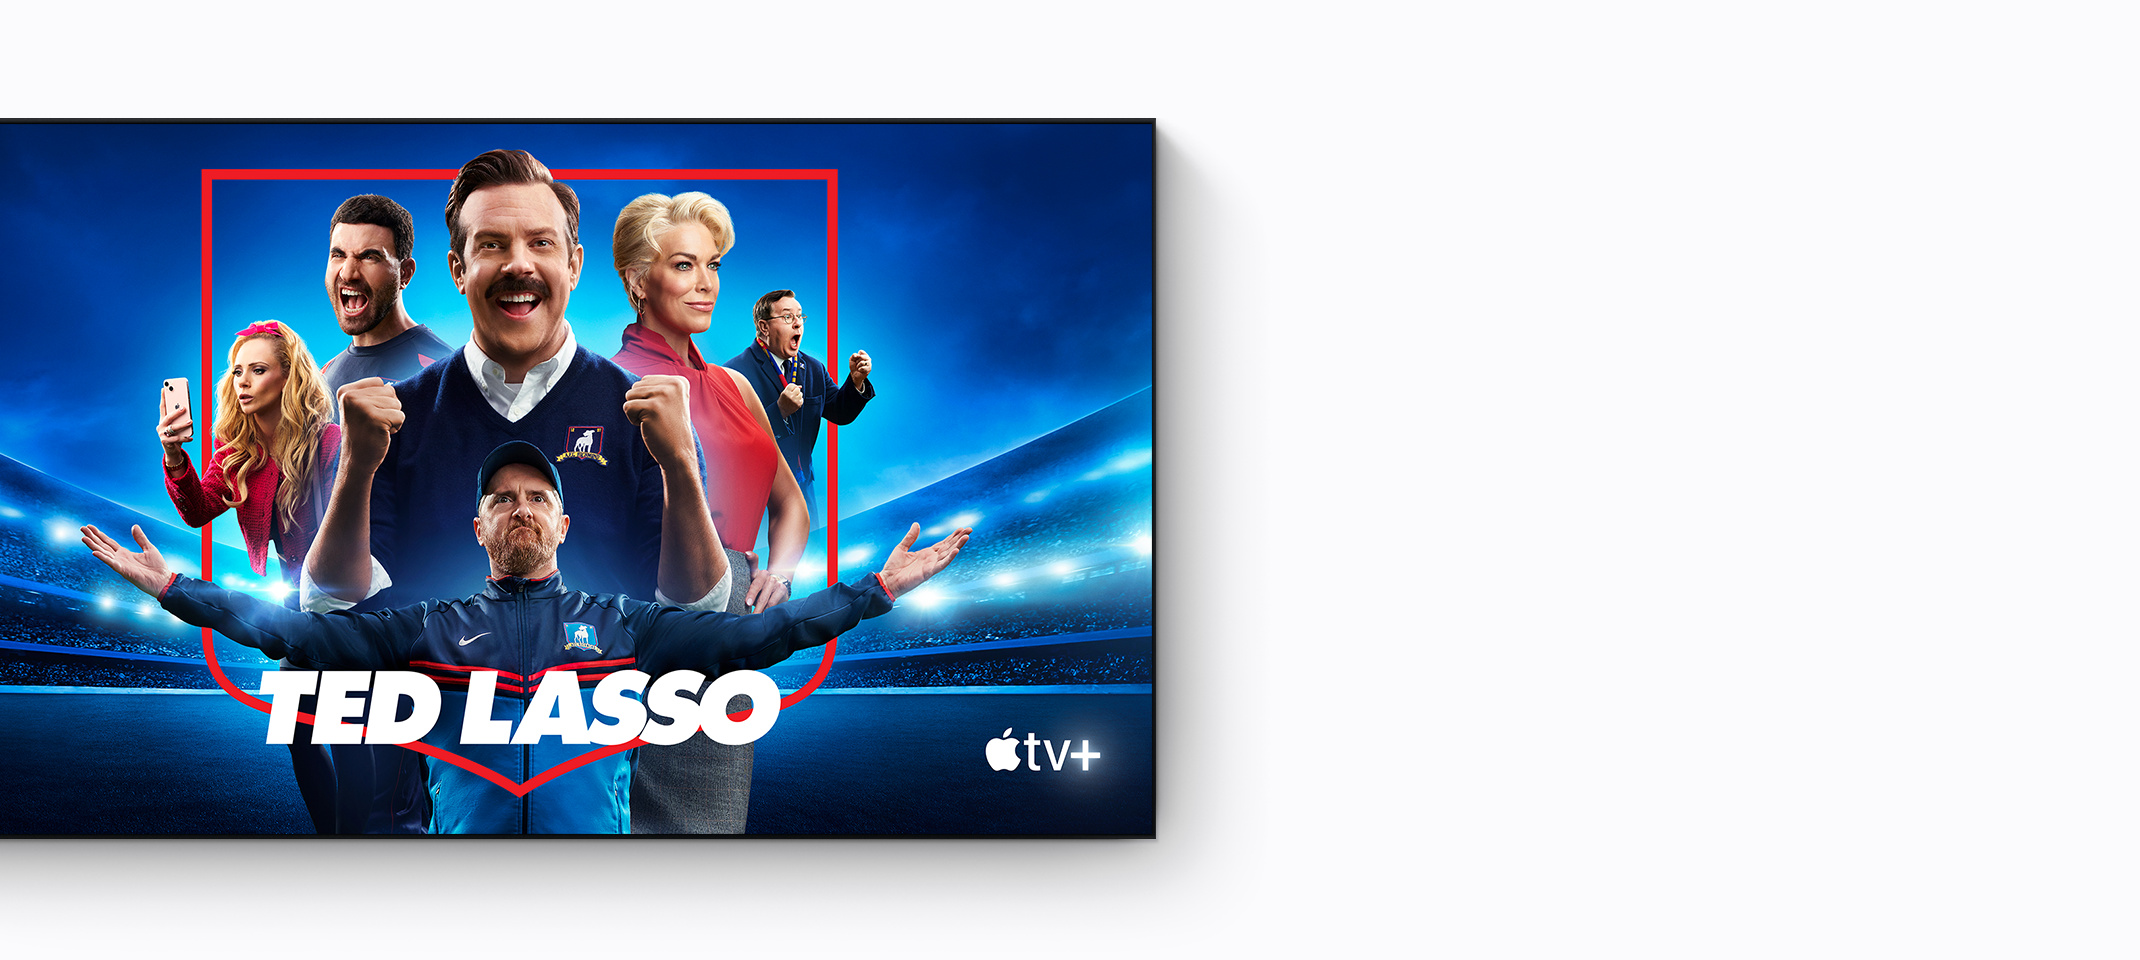 Ted Lasso on Apple TV+ starring Jason Sudeikis, smiling, pumping fists, Brendan Hunt, arms stretched wide in triumph, Brett Goldstein shouting powerfully in celebration, Juno Temple snapping a photo with her iPhone, Hannah Waddingham staring contemplatively into the distance, all centred in the red outline of a club crest, football stadium shrouded in blue and black